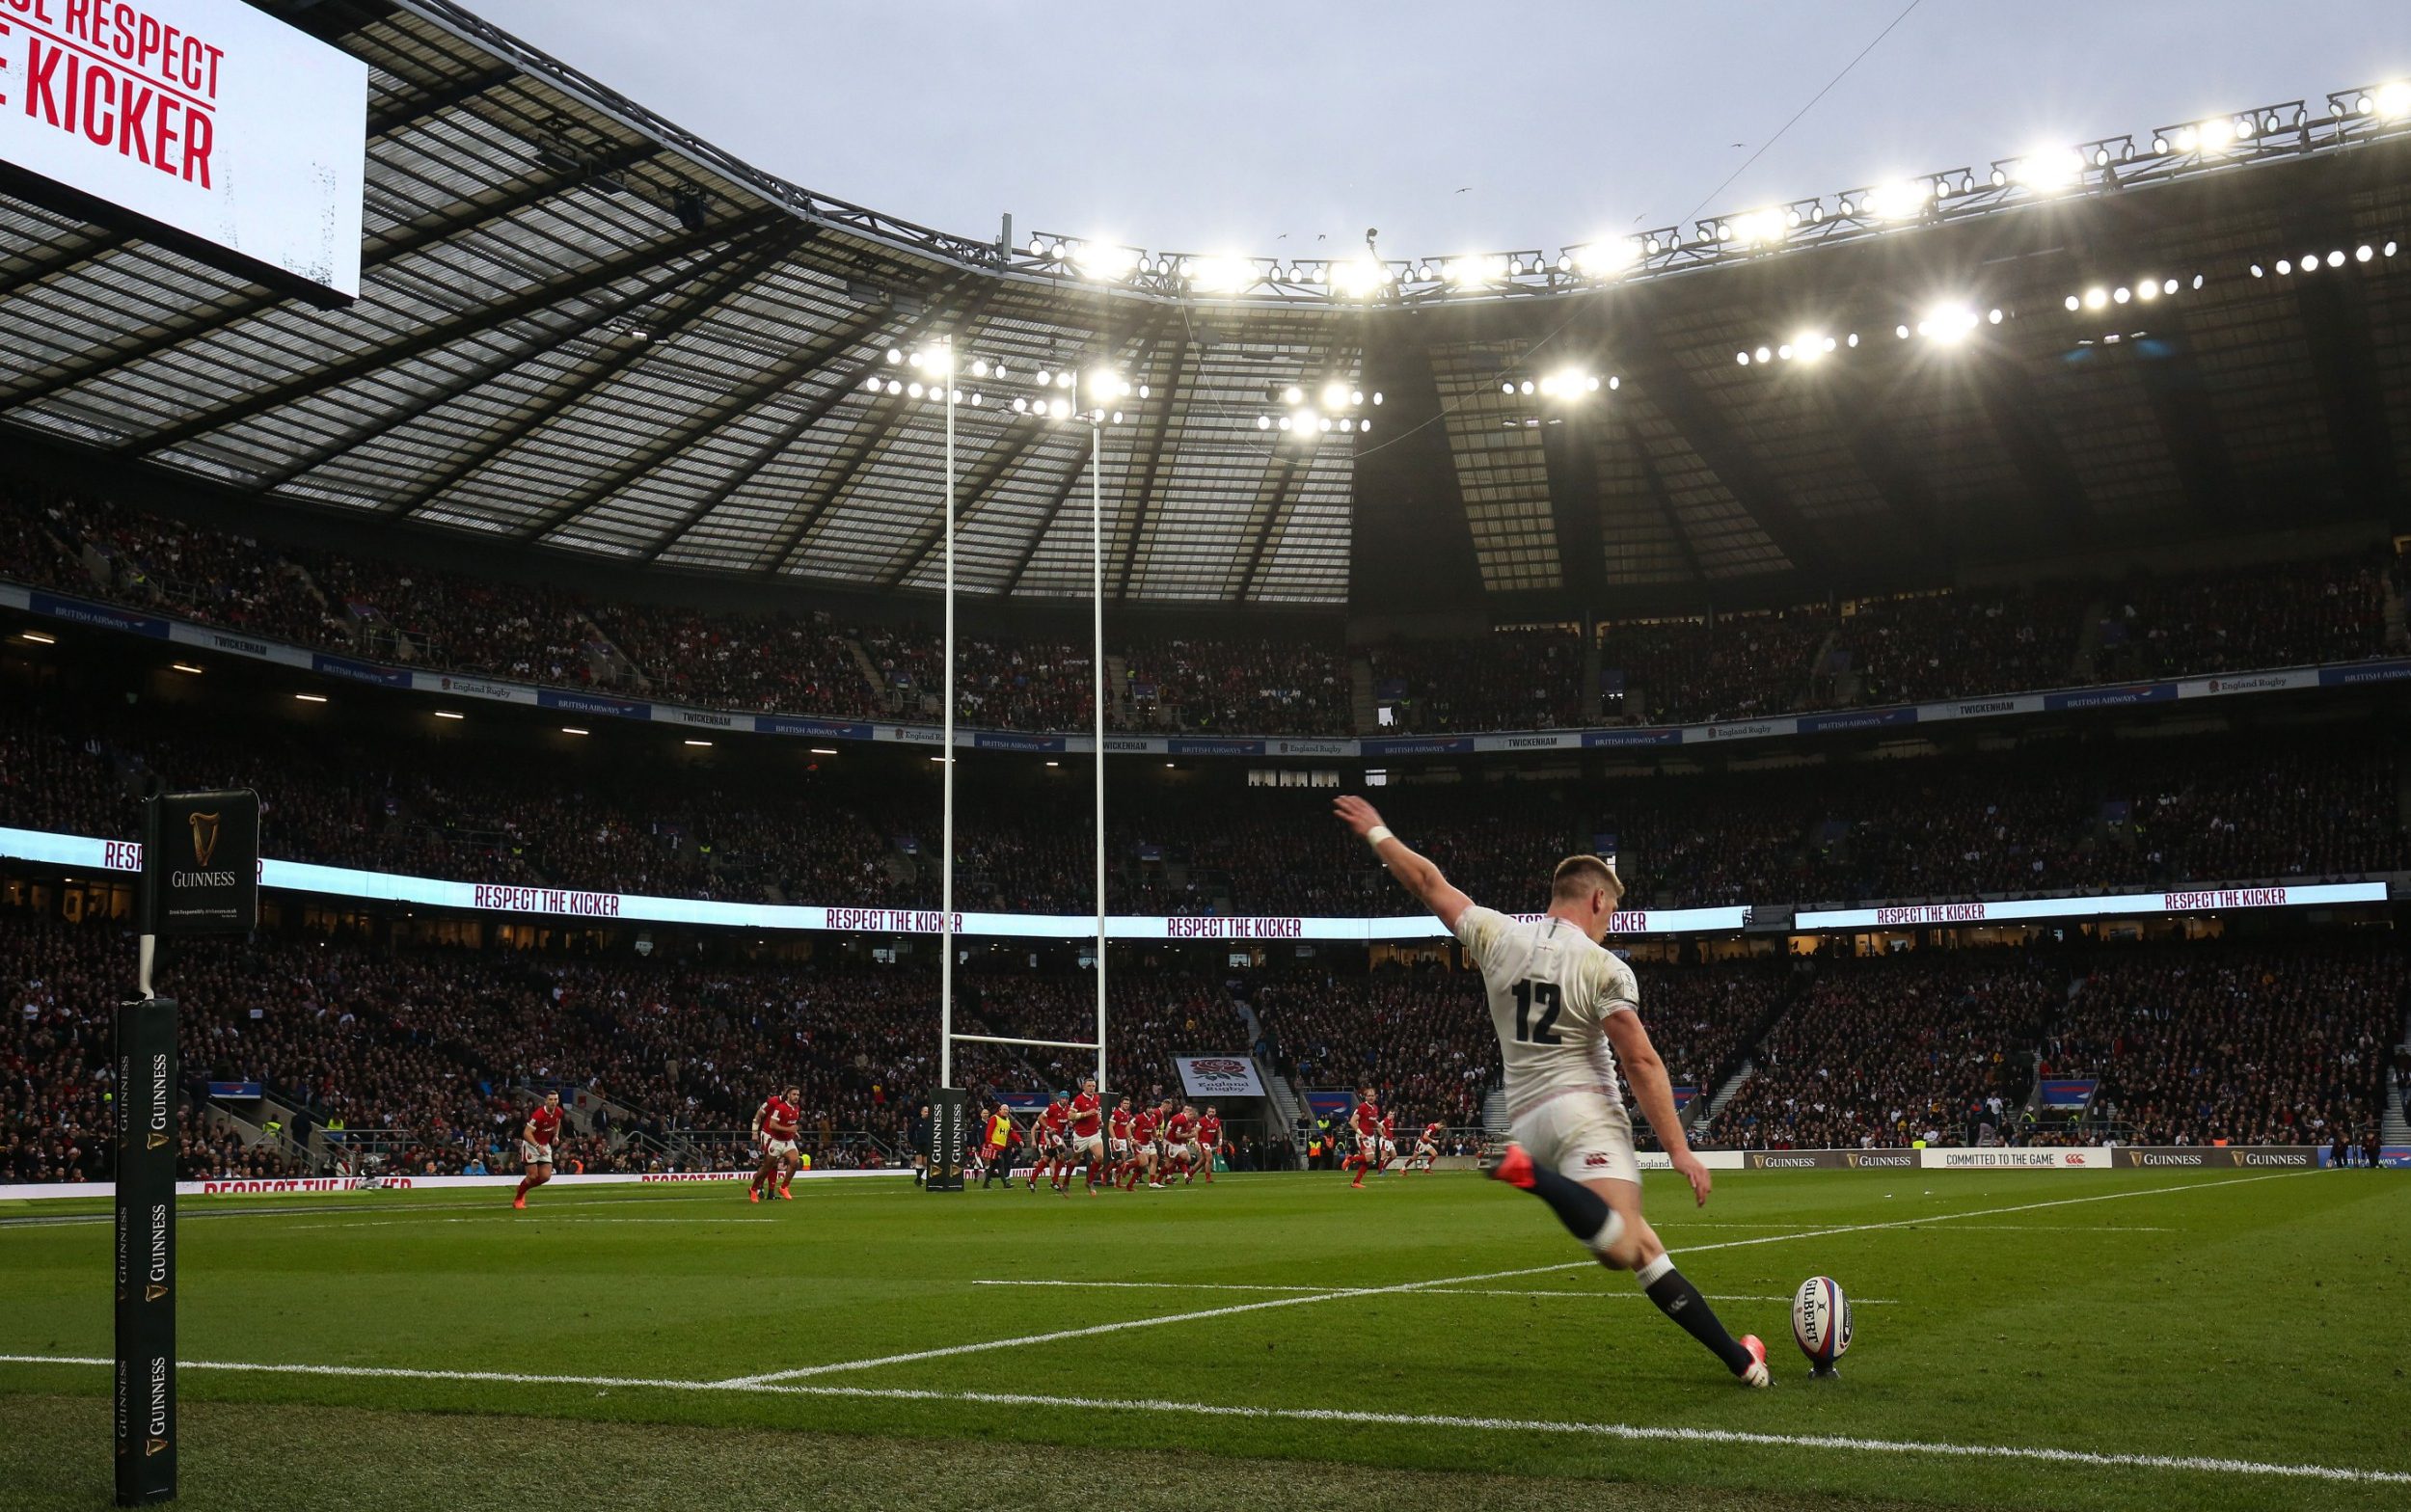 rfu considered selling twickenham and buying 50 per cent of wembley, leaked documents reveal